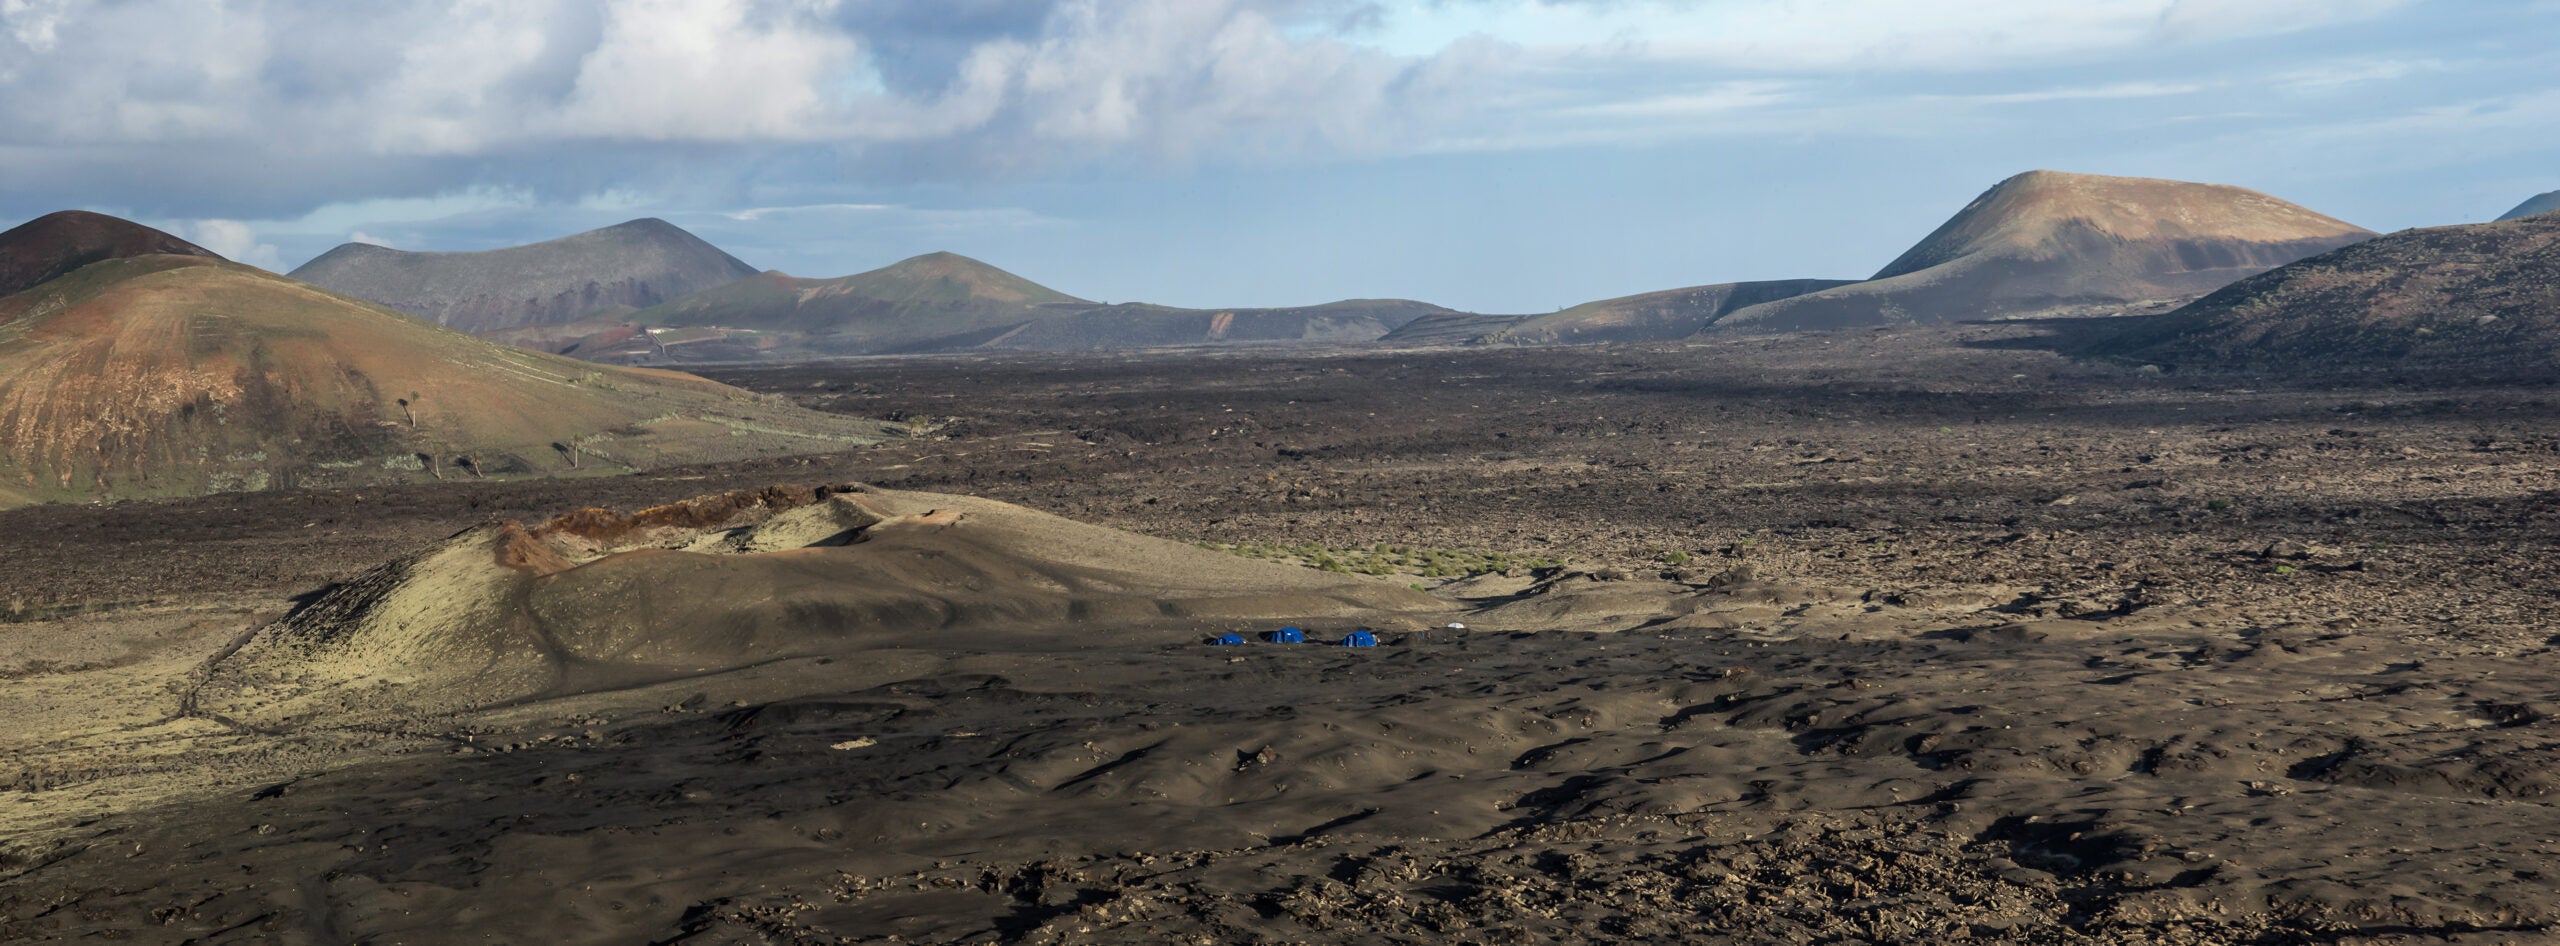 barren landscape of lanzarote in the canary islands